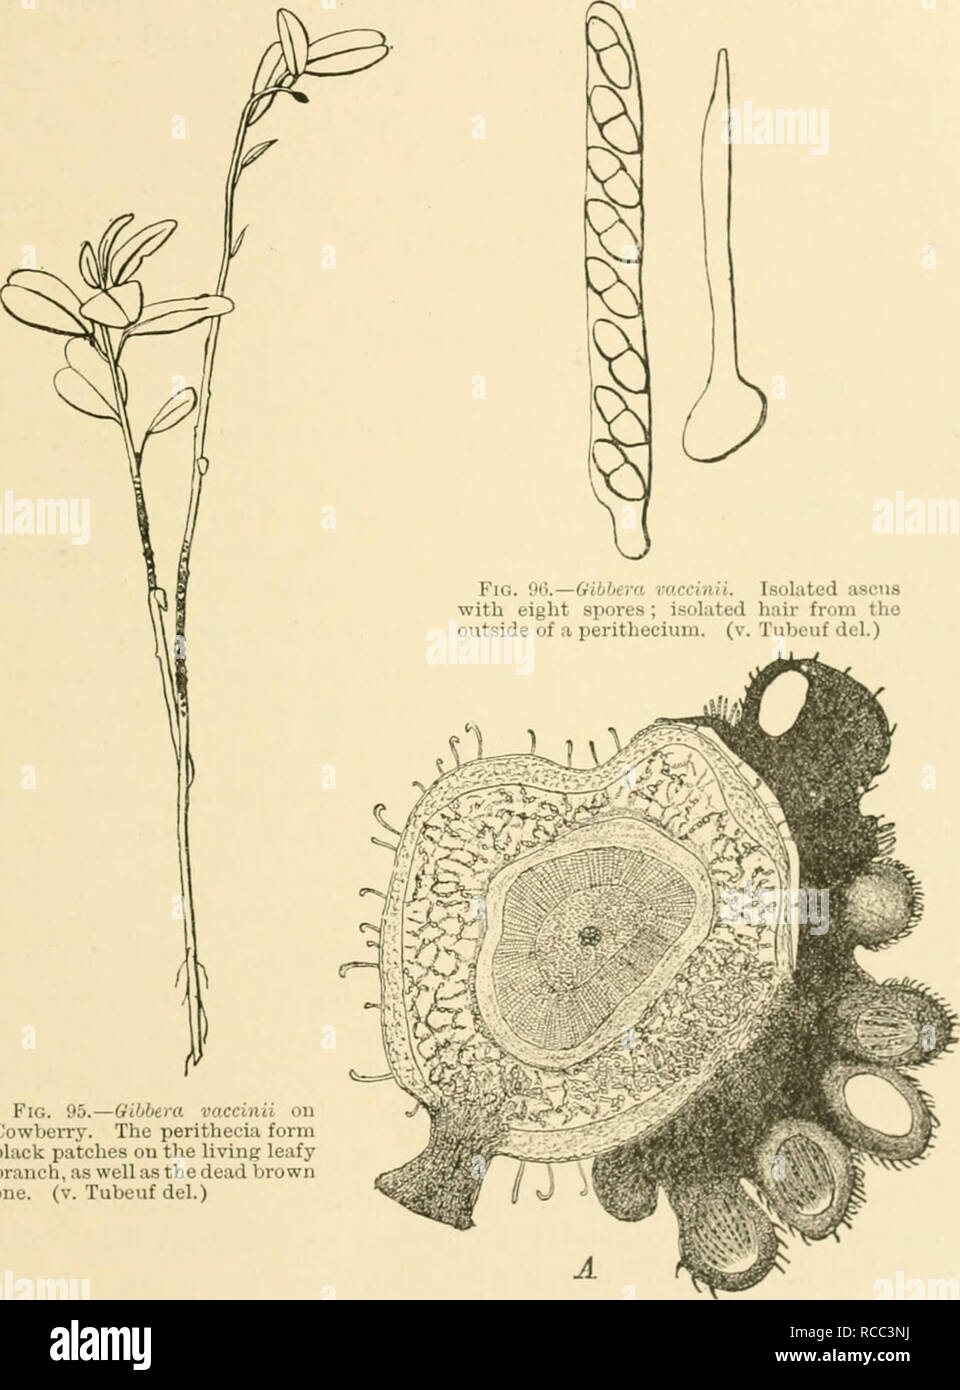 . Diseases of plants induced by cryptogamic parasites; introduction to the study of pathogenic Fungi, slime-Fungi, bacteria, &amp; Algae. Plant diseases; Parasitic plants; Fungi. •205 twigs brown and dead (Fig. 95). If more closely examined, the twigs will be found to bear patches of coal-black,. Fig. 05.—Gibbera Cowberry. The perithecia form black patches on the living leafy branch, as well as the dead brown one. (v. Tubeuf del.) Fig. 07.—6ibbera vaccinii. Cross-section of Cowberry showing a patch of perithecia in section ; the hairy perithecia contain paraphvses and asci with spores ; a niyc Stock Photo